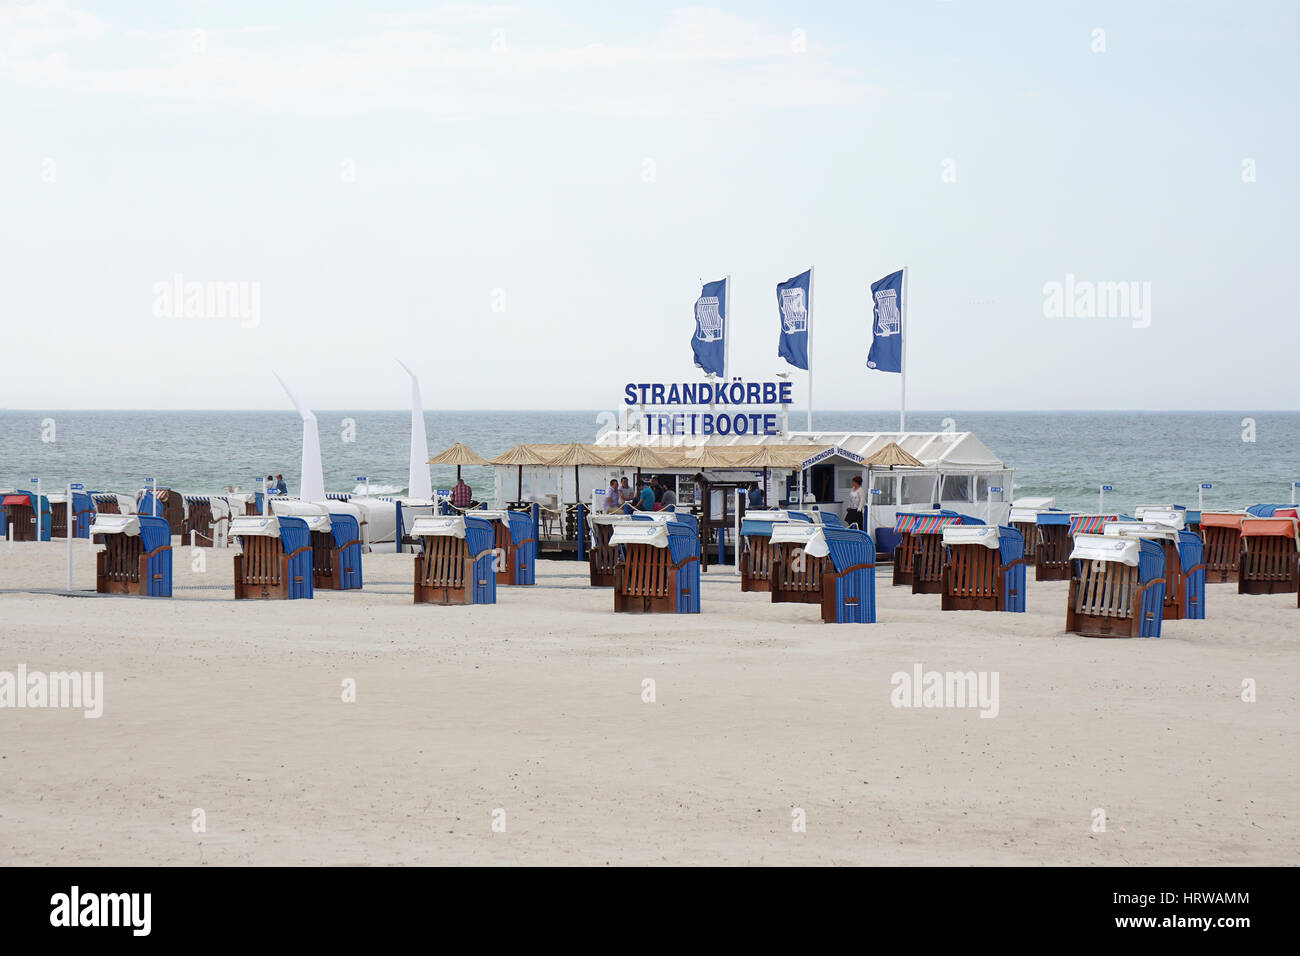 Rostock, Germany - May 30th, 2016: Beach bar with roofed wicker beach chair, known as Strandkorb in Germany, rental on a preseason day at Warnemunde s Stock Photo